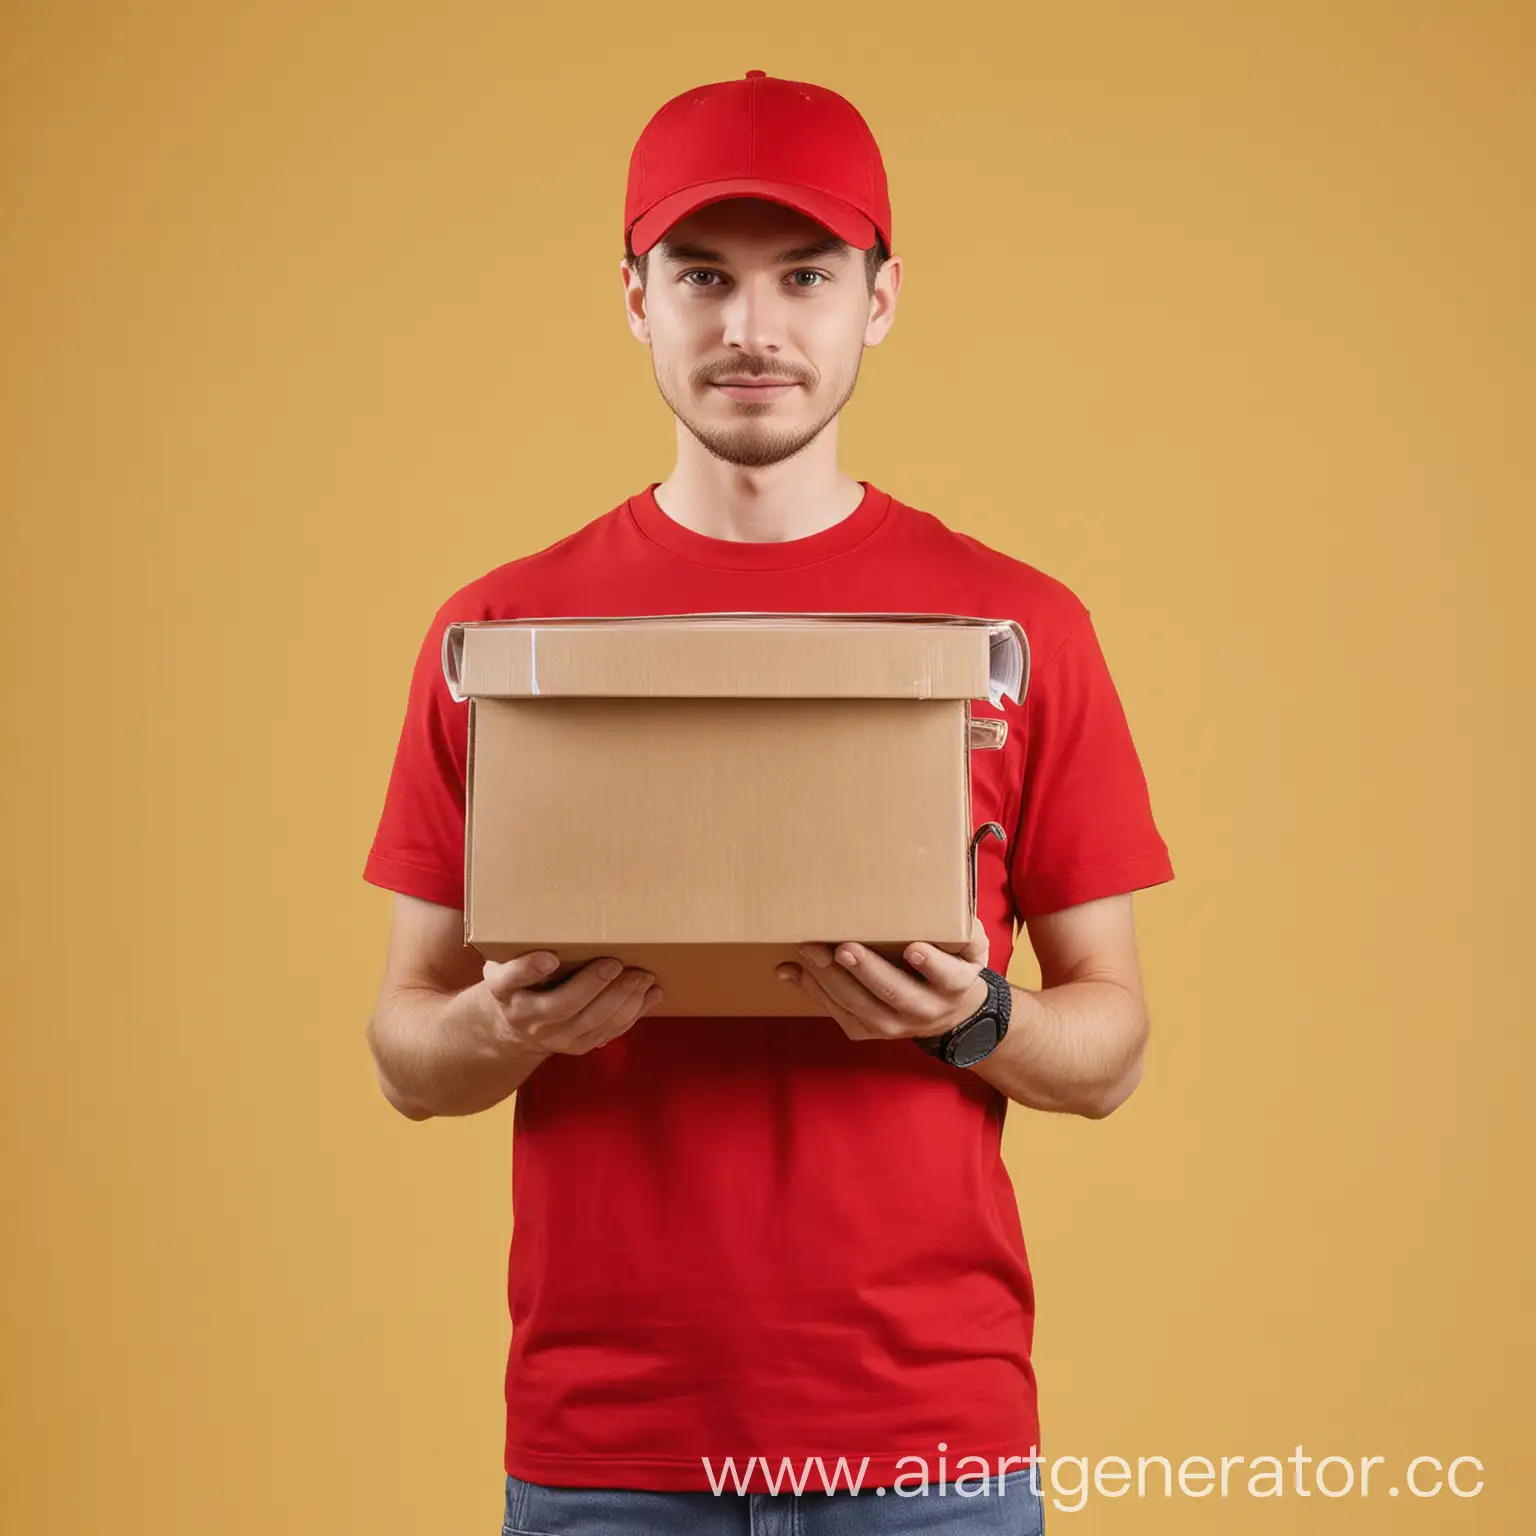 Courier-in-Red-TShirt-and-Cap-Carrying-Documents-on-Yellow-Background